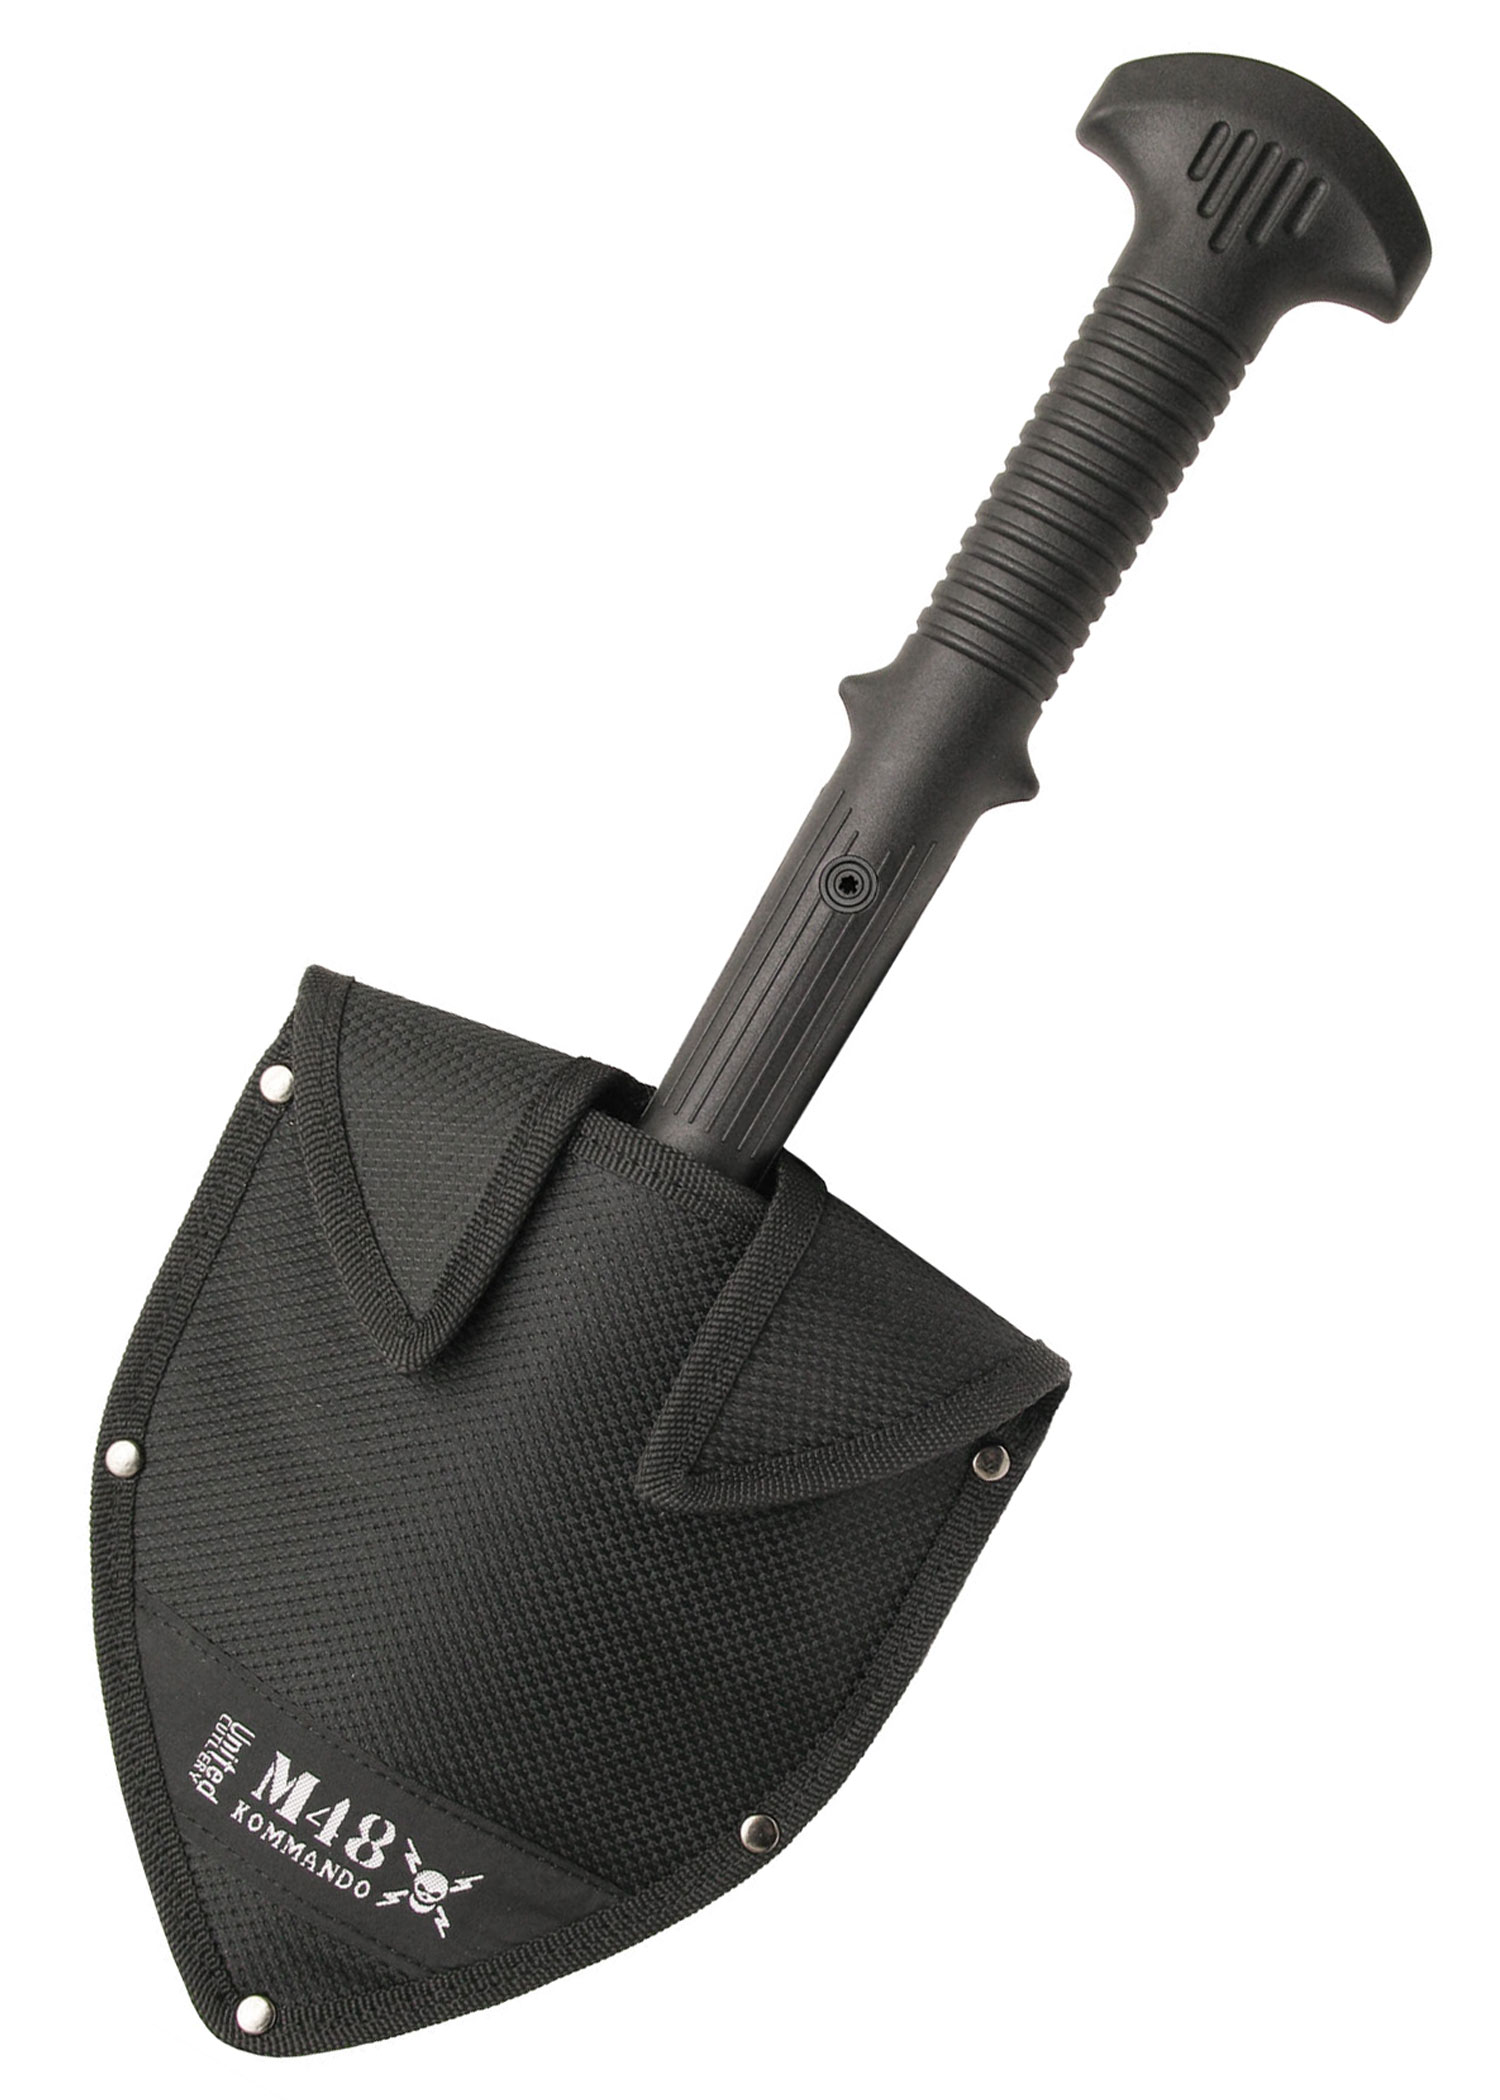 M48 Tactical Shovel With Sheath, united cutlery, uc2979